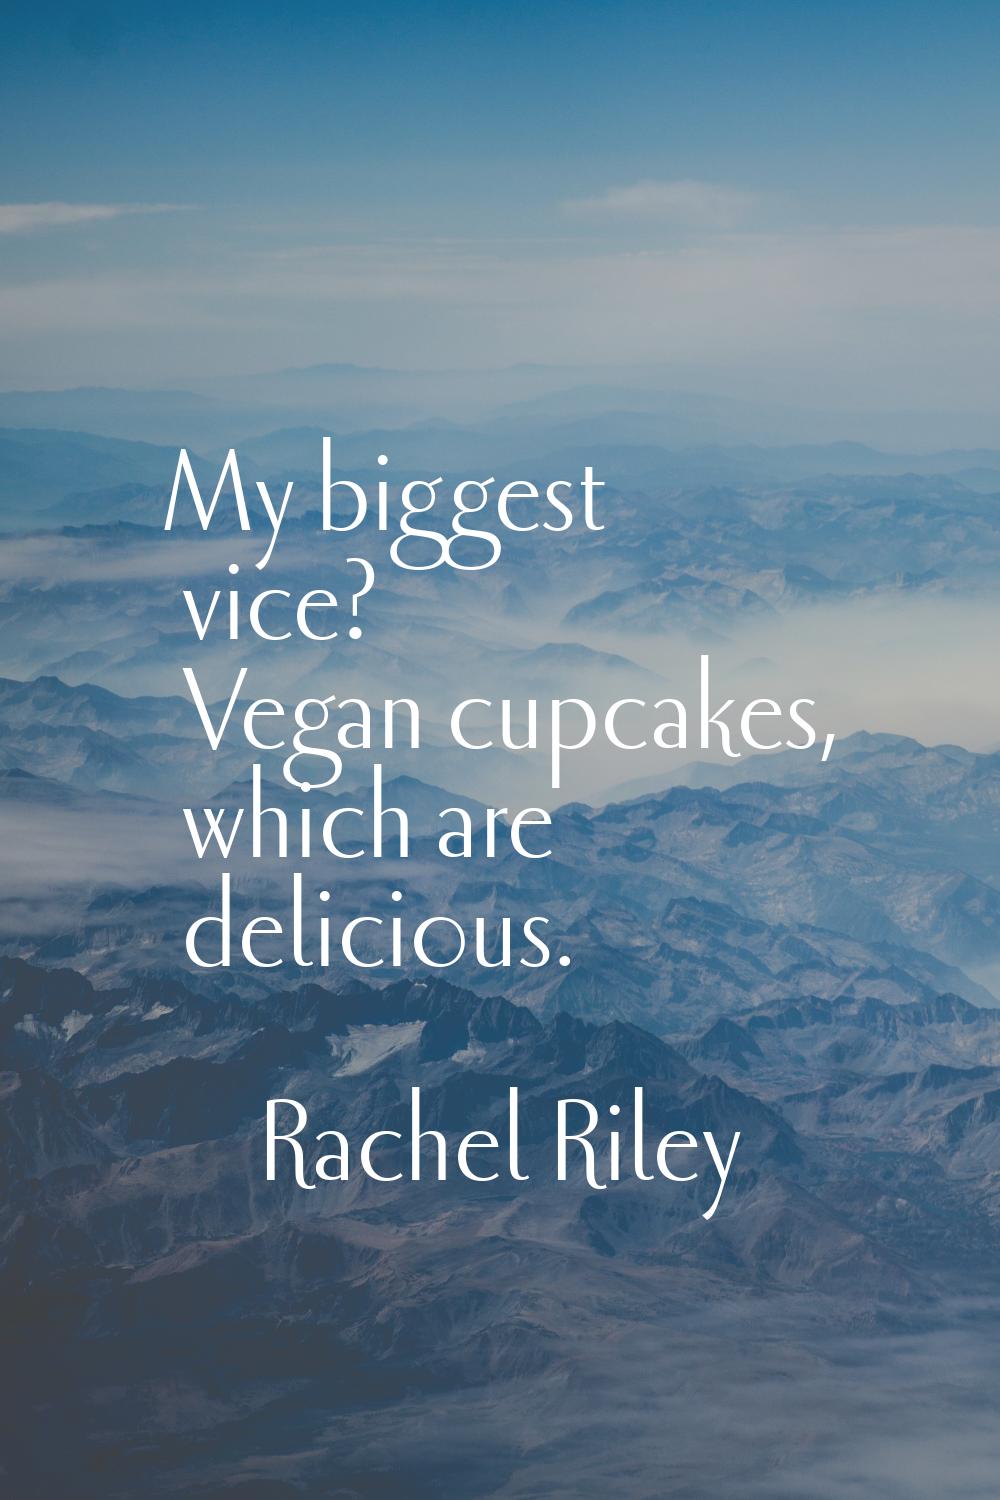 My biggest vice? Vegan cupcakes, which are delicious.